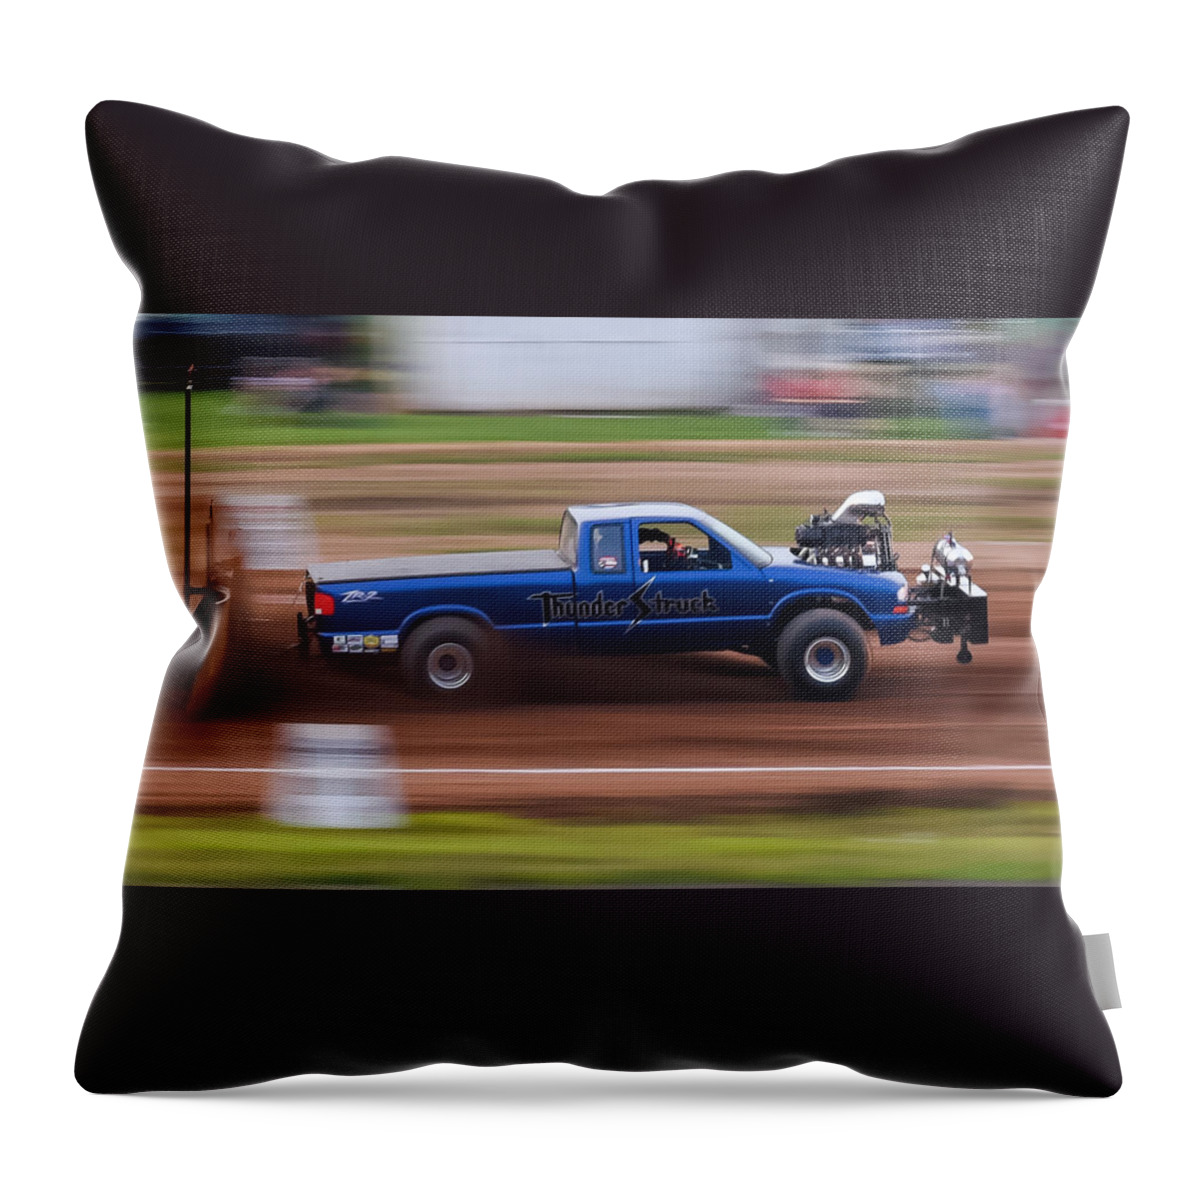 Thunder Struck Throw Pillow featuring the photograph Thunder Struck by Holden The Moment